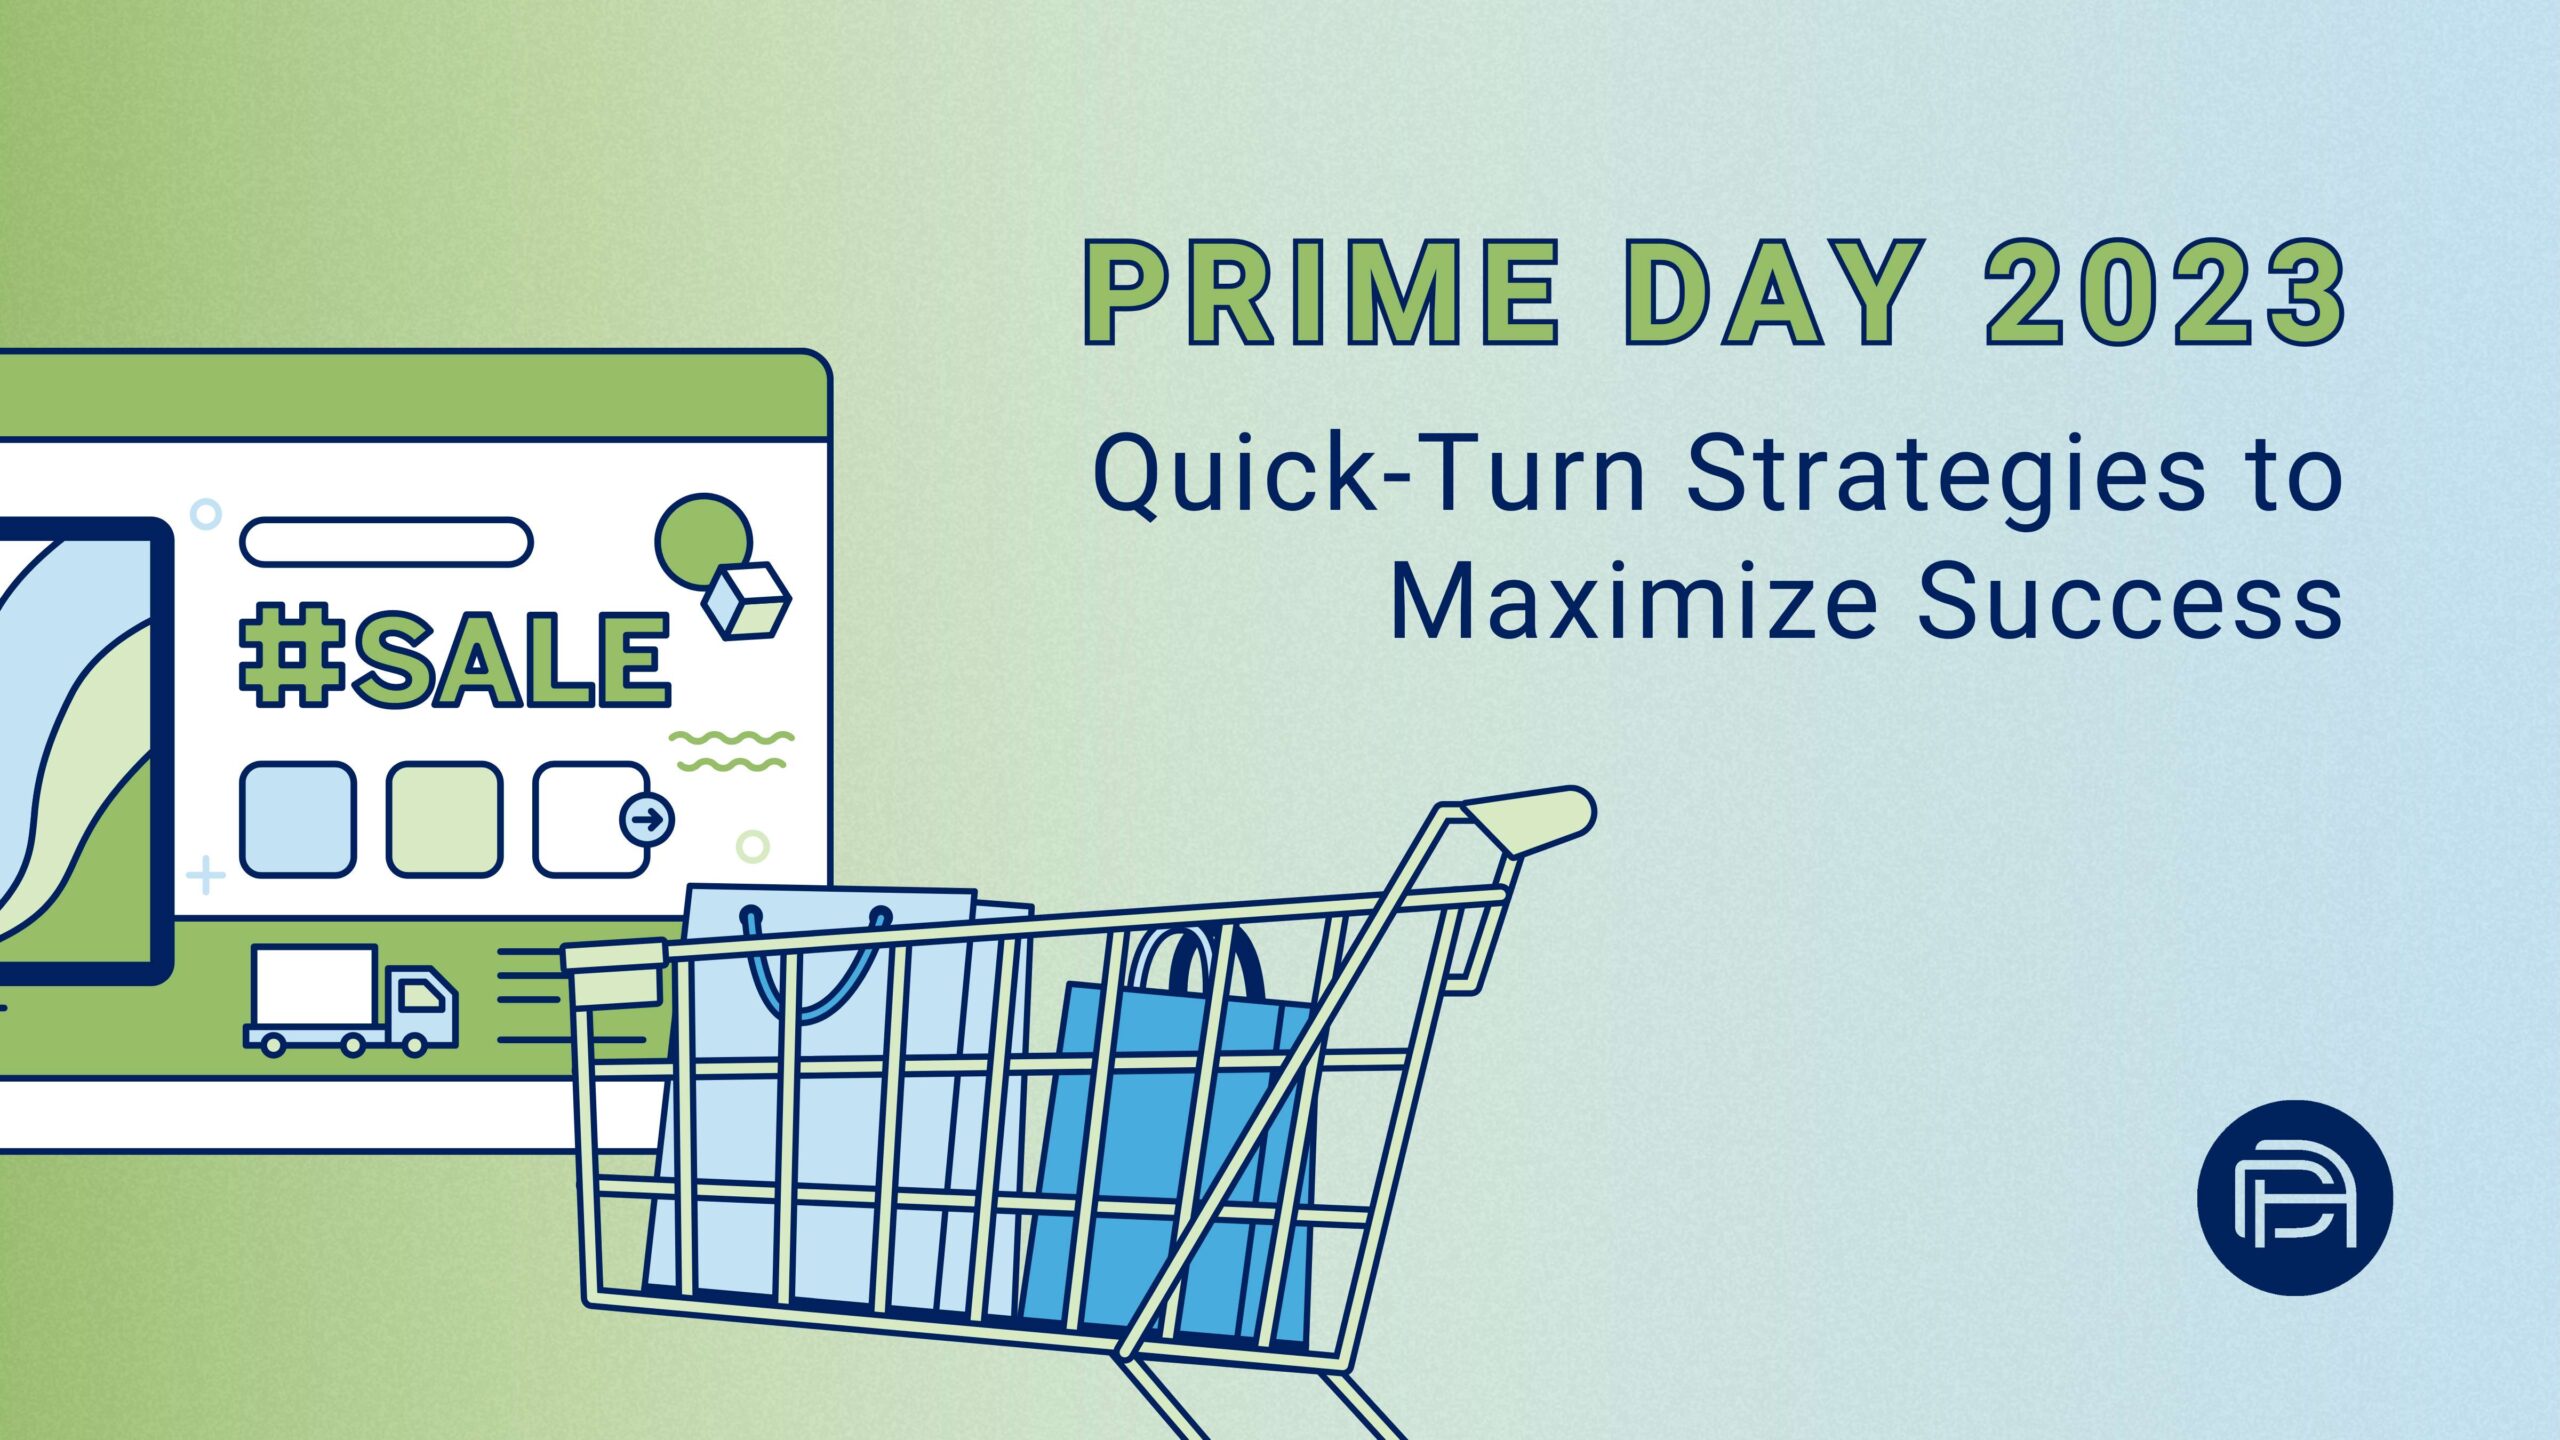 Prime Day 2023 Announced for July 11th & 12th: Quick-Turn Strategies to Maximize Success